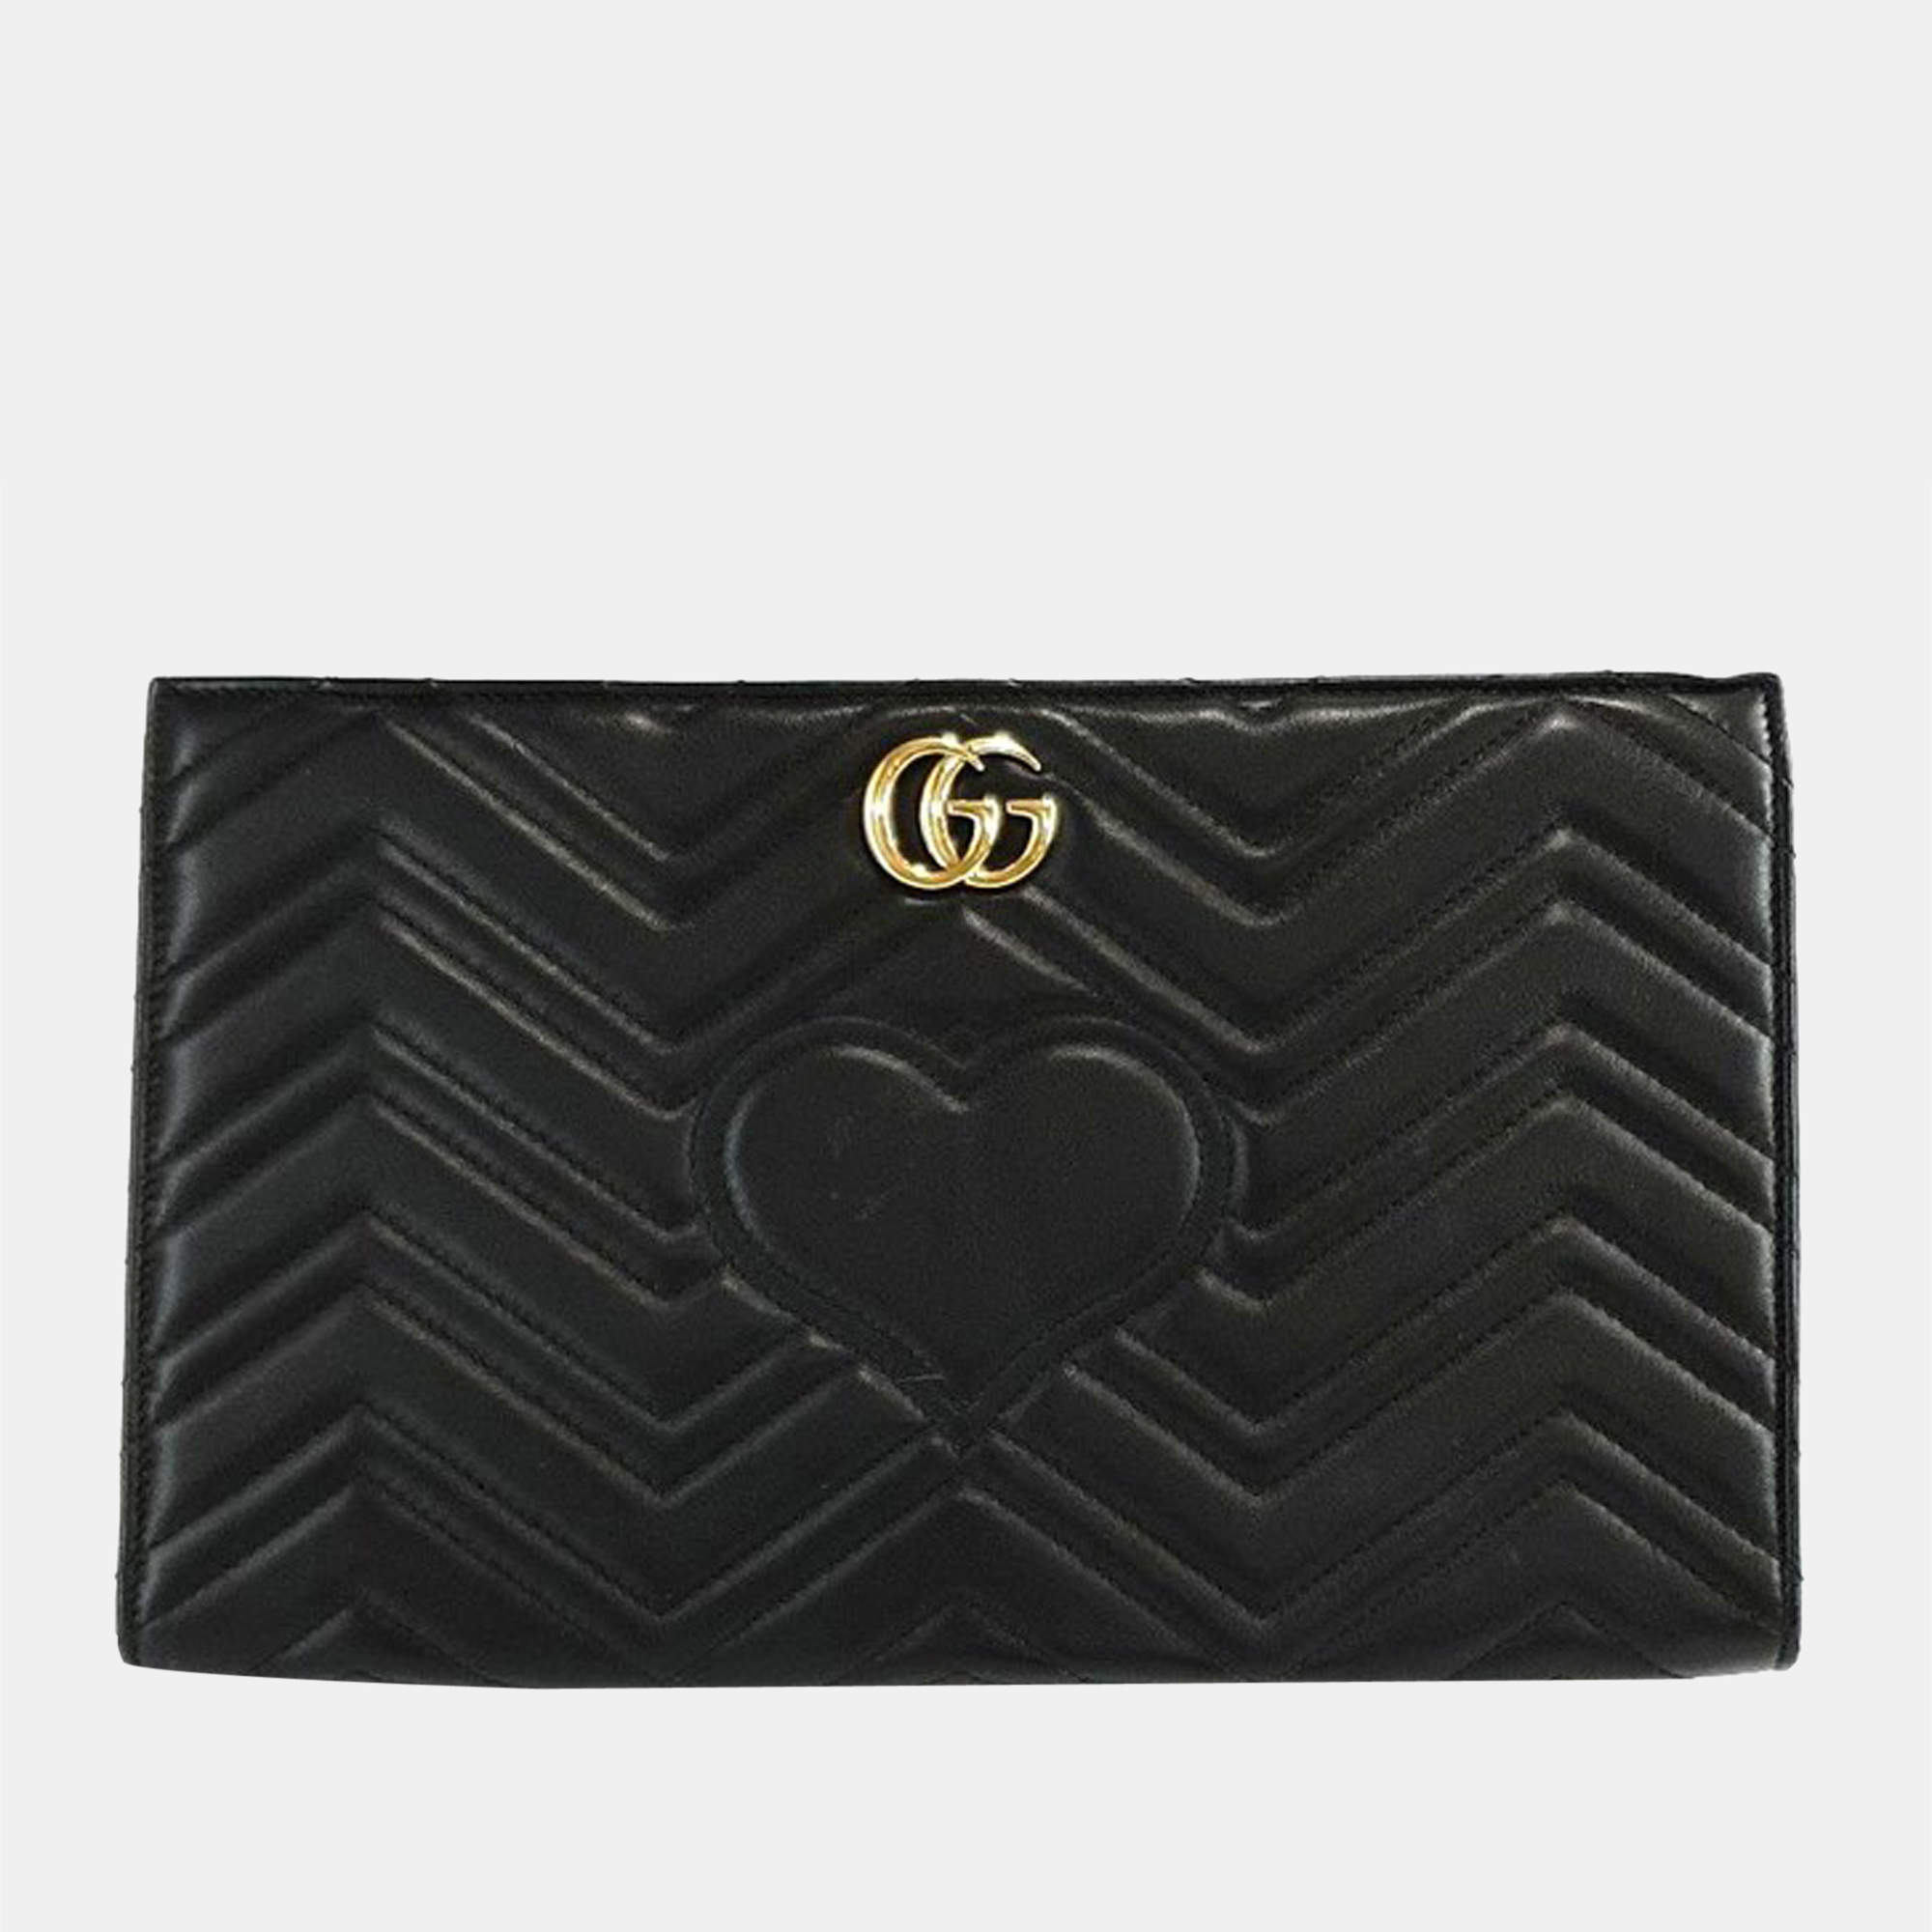 Gucci Black Leather GG Marmont Clutch